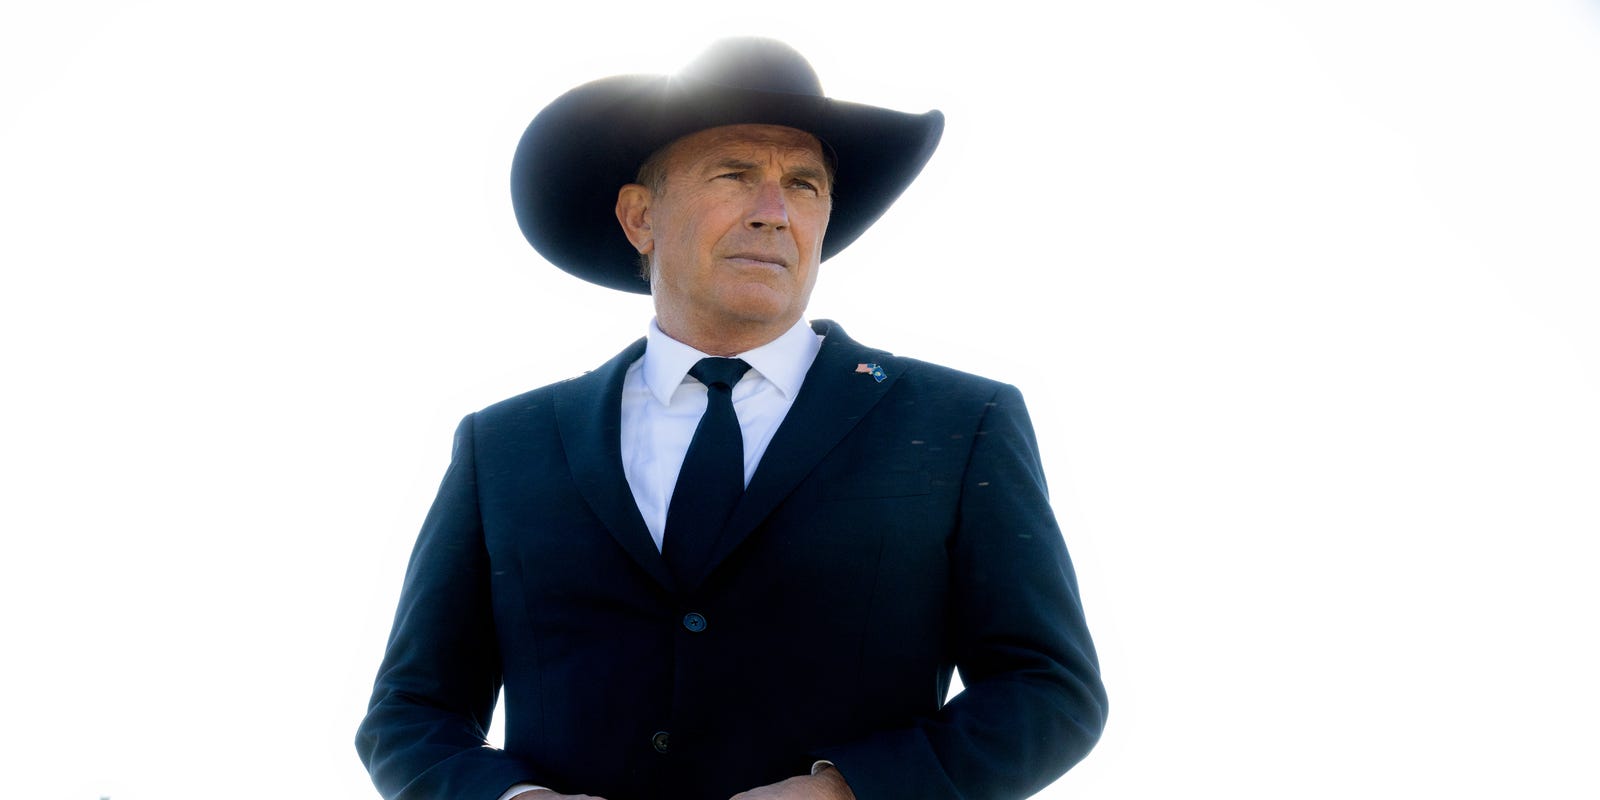 Yellowstone': Kevin Costner on John Dutton's entry into politics